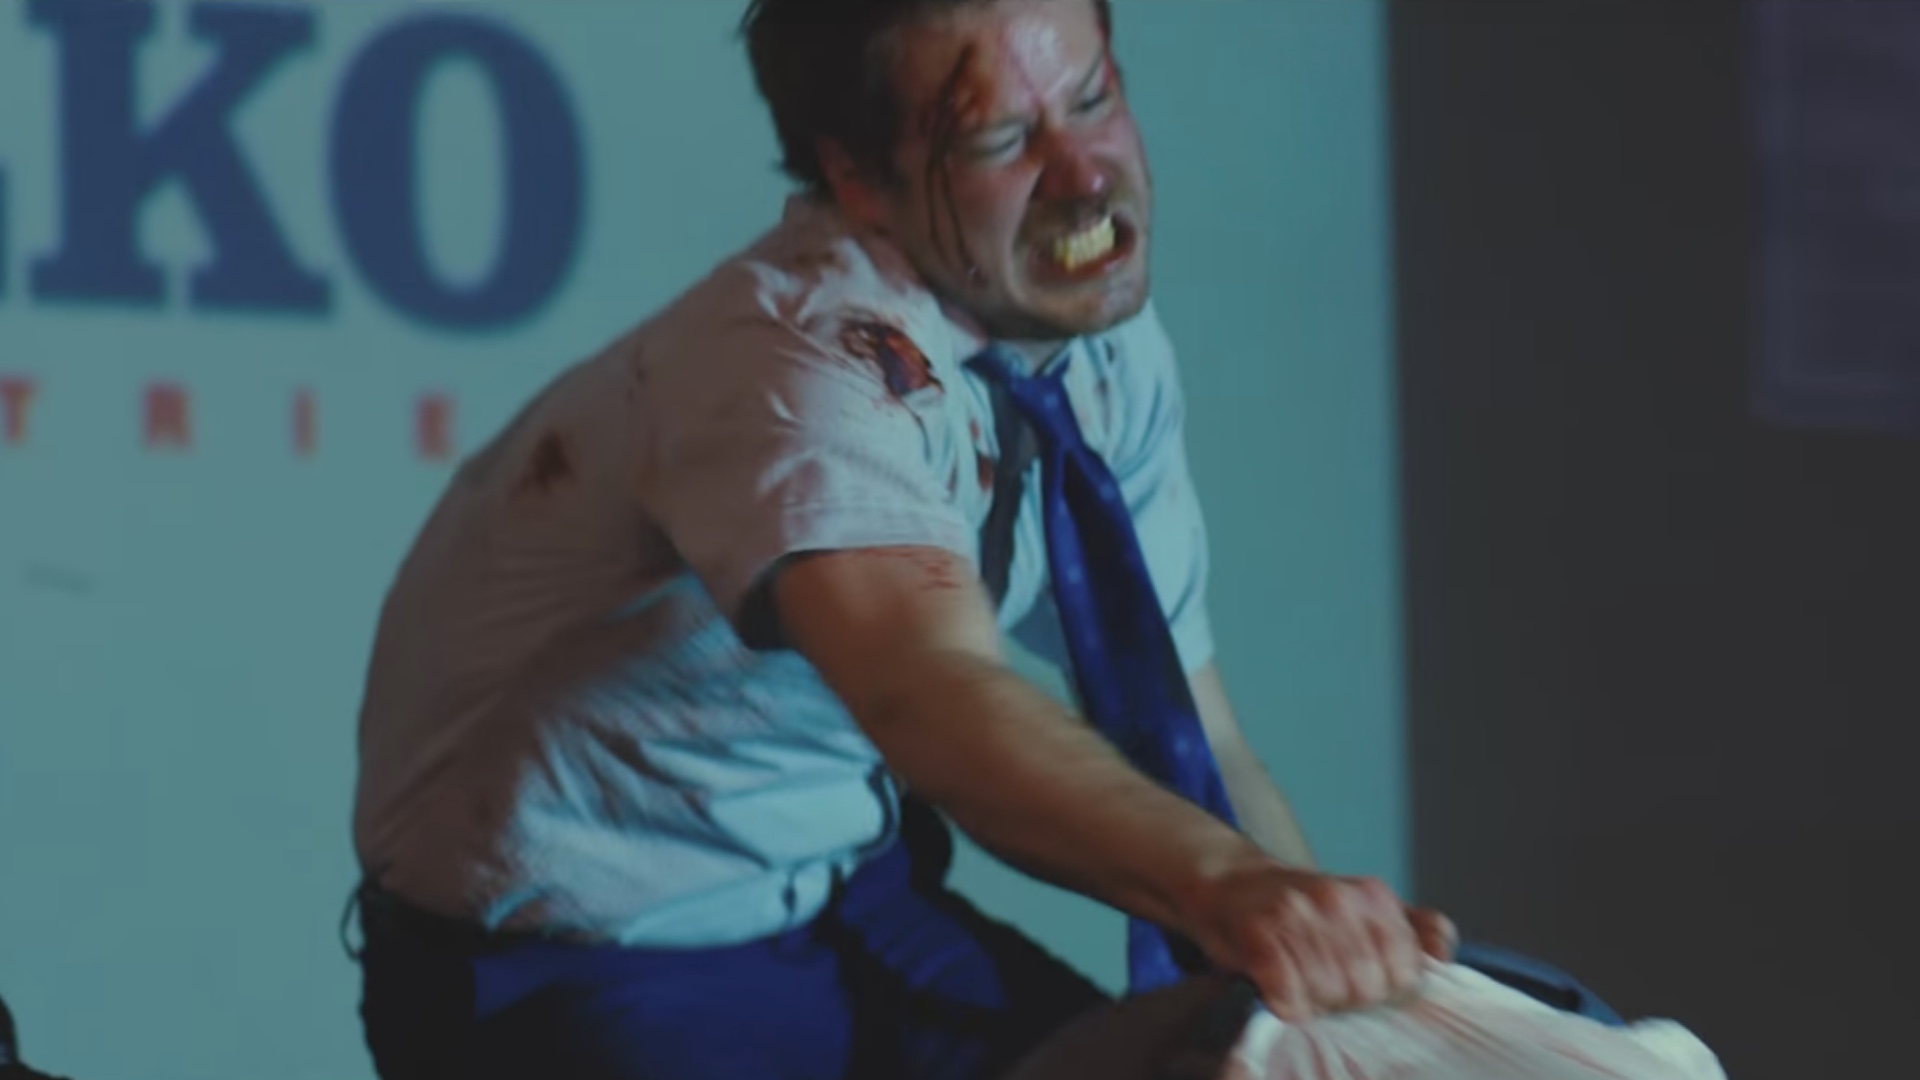 Twisted Red-Band Trailer for James Gunn's THE BELKO EXPERIMENT.